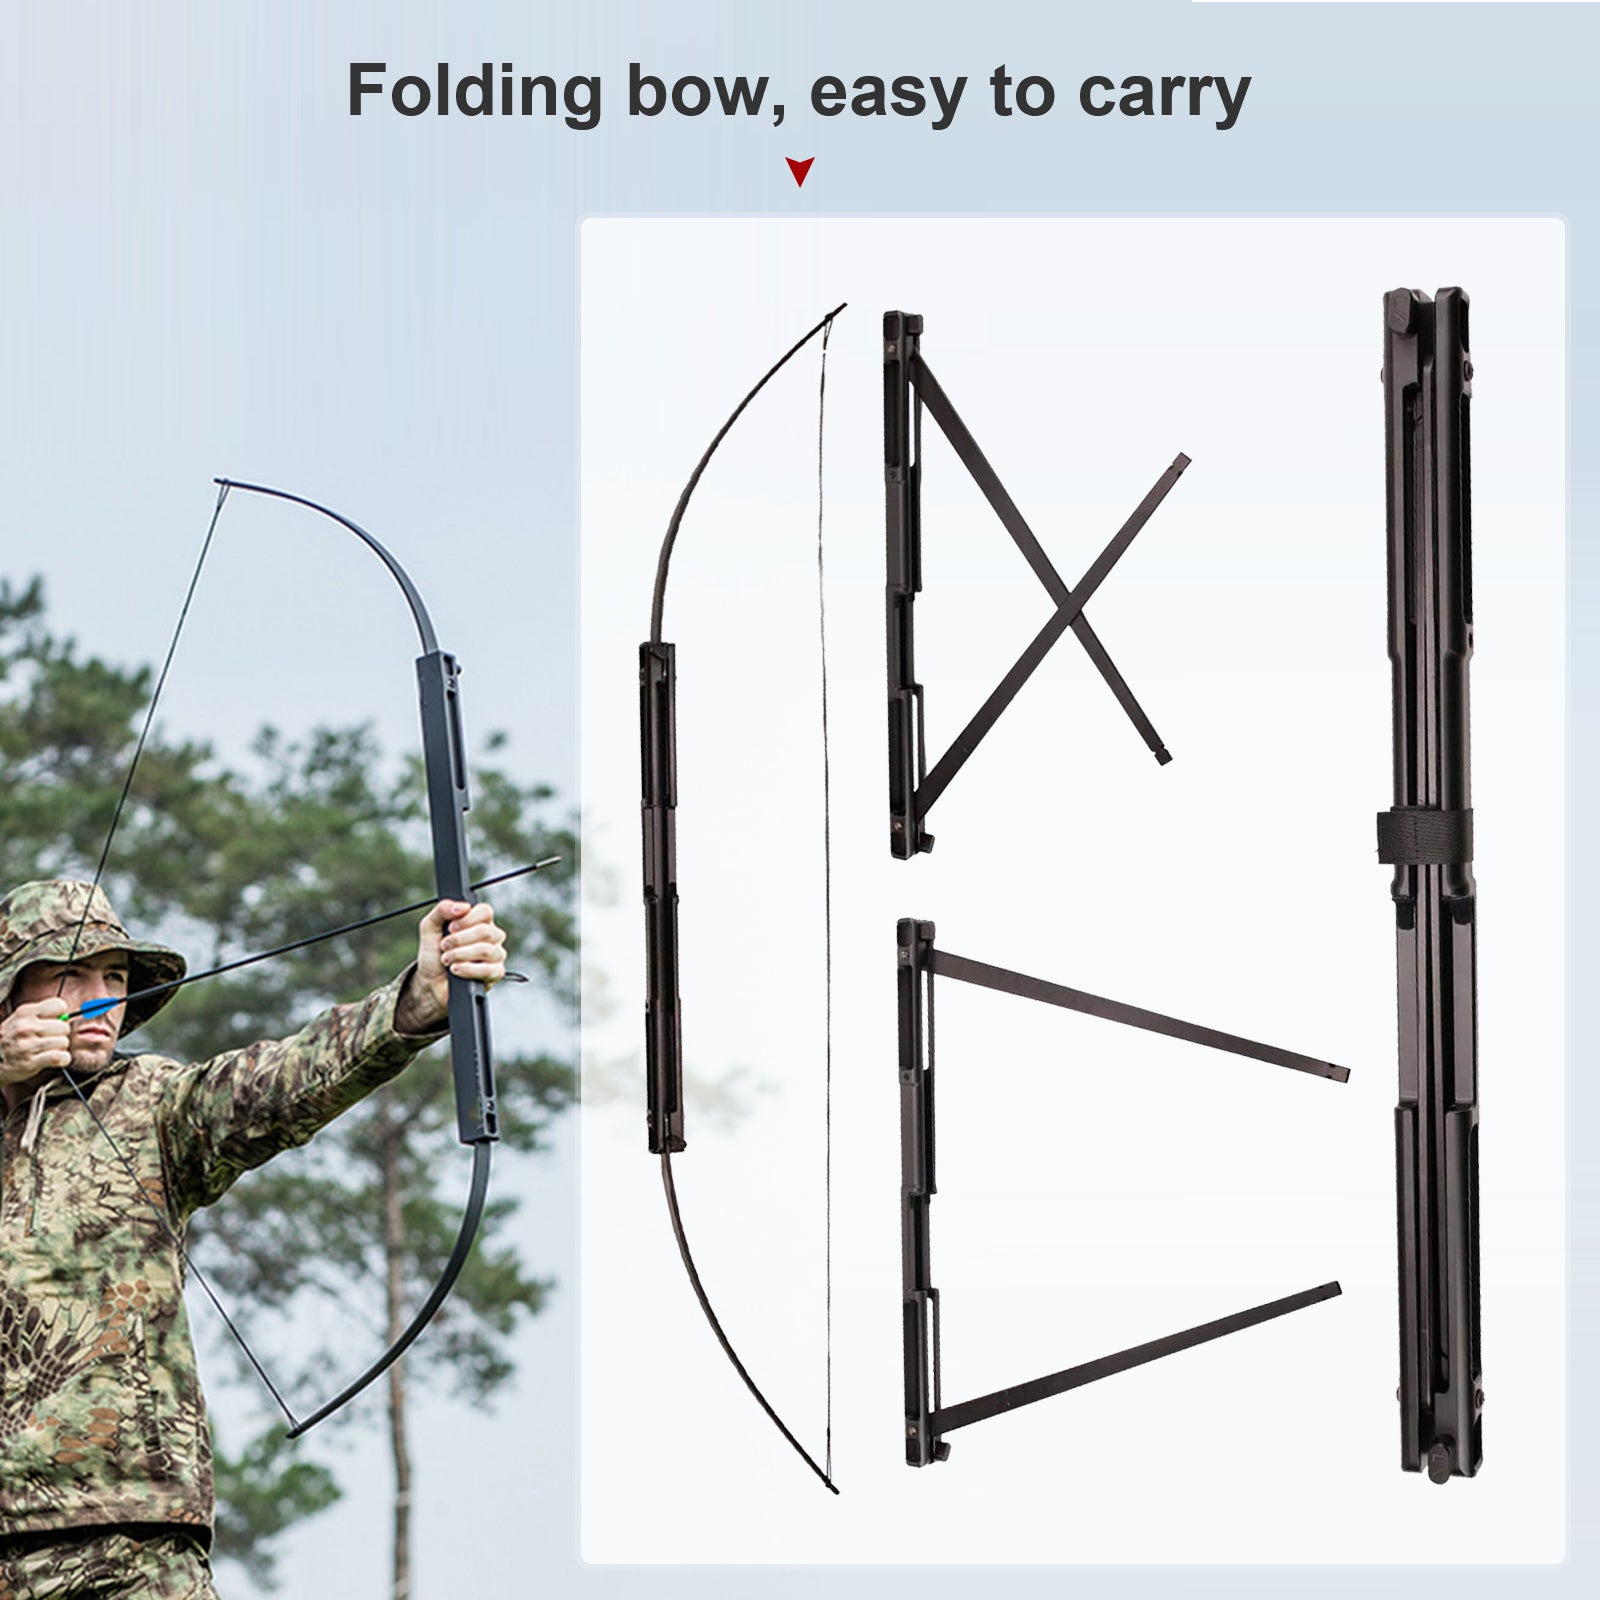 22lbs Outdoor Archery Folding Bow Aviation Aluminum Alloy Bow Handle High  Quality Easy To Carry Faster Arrow Speed